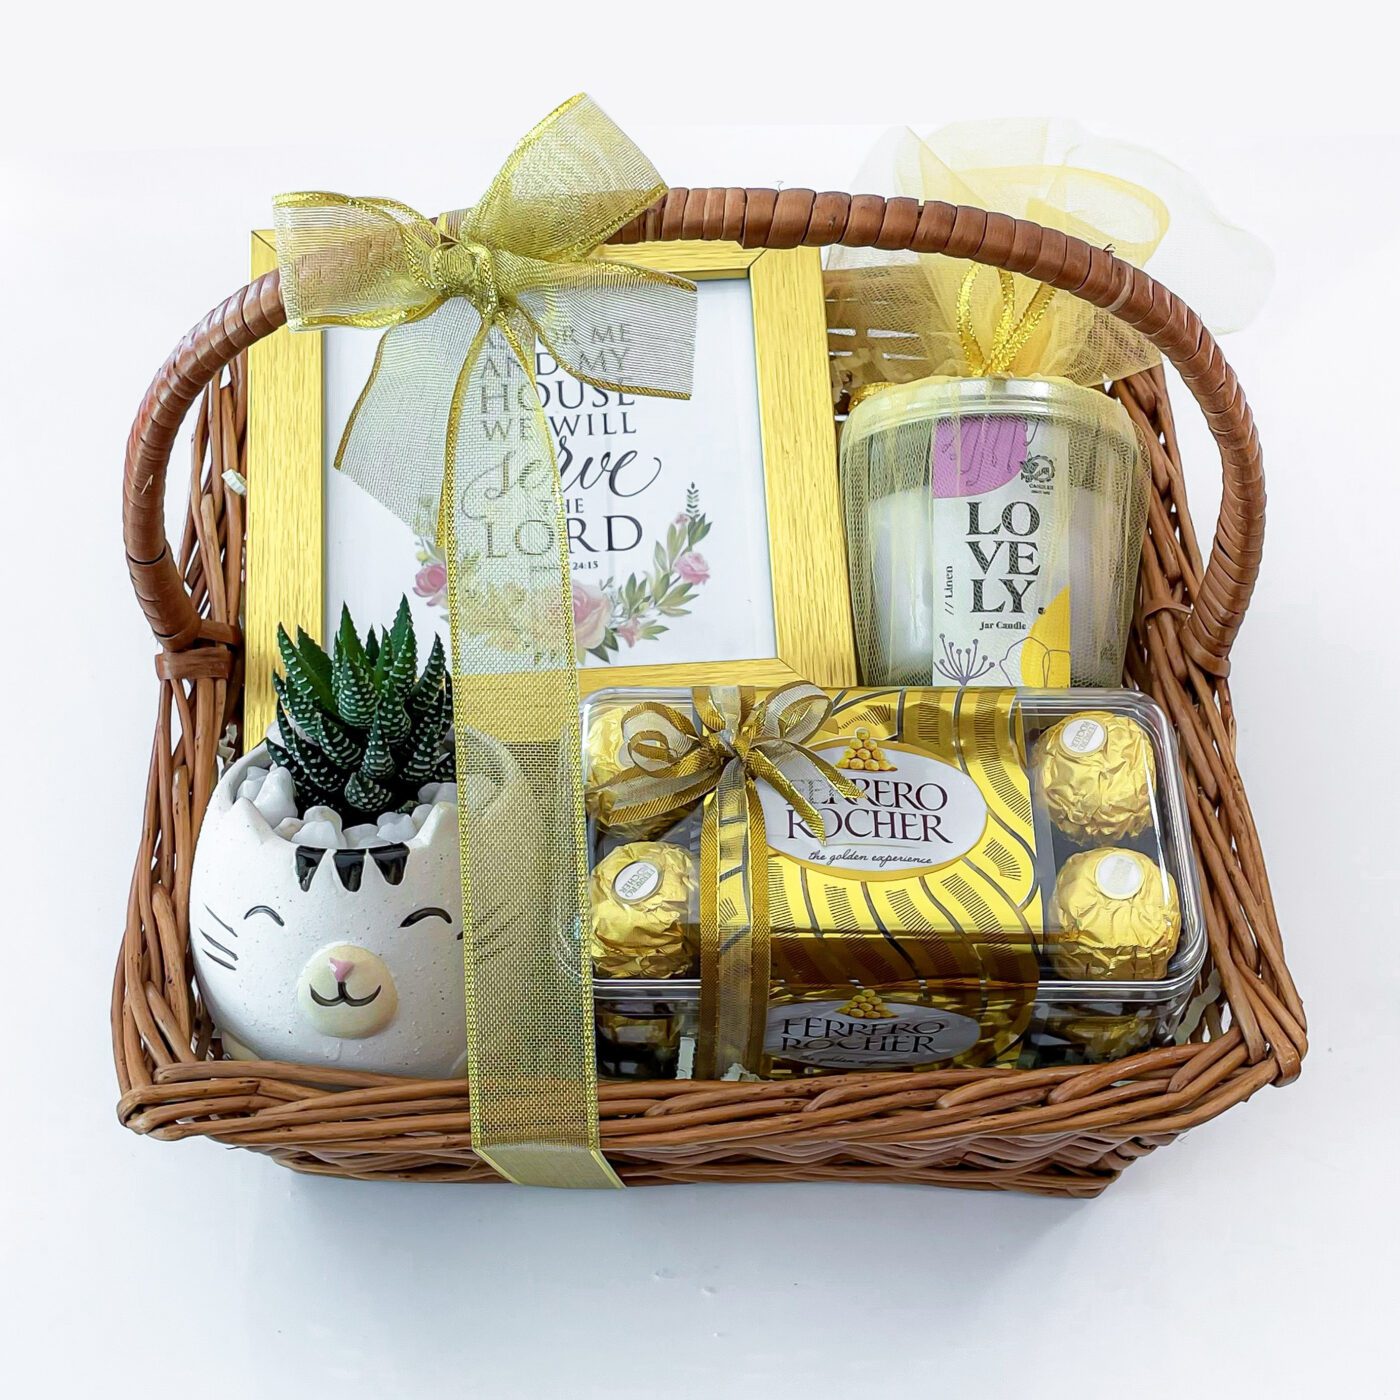 Return Gifts For Housewarming Online India | Unique Housewarming Gifts by  Ranjeet Singh - Issuu